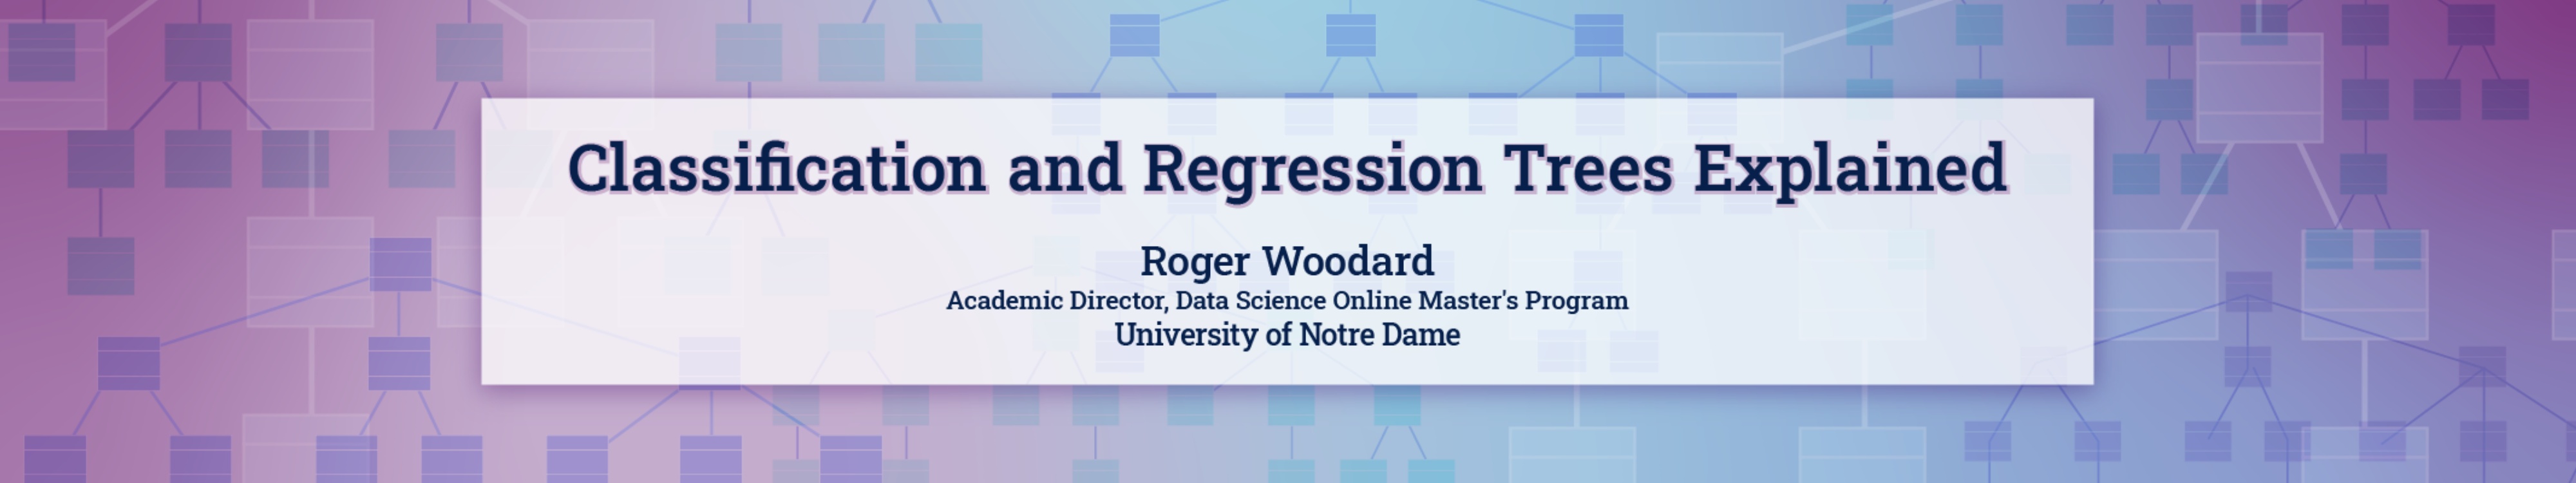 Classification and Regression Trees Explained